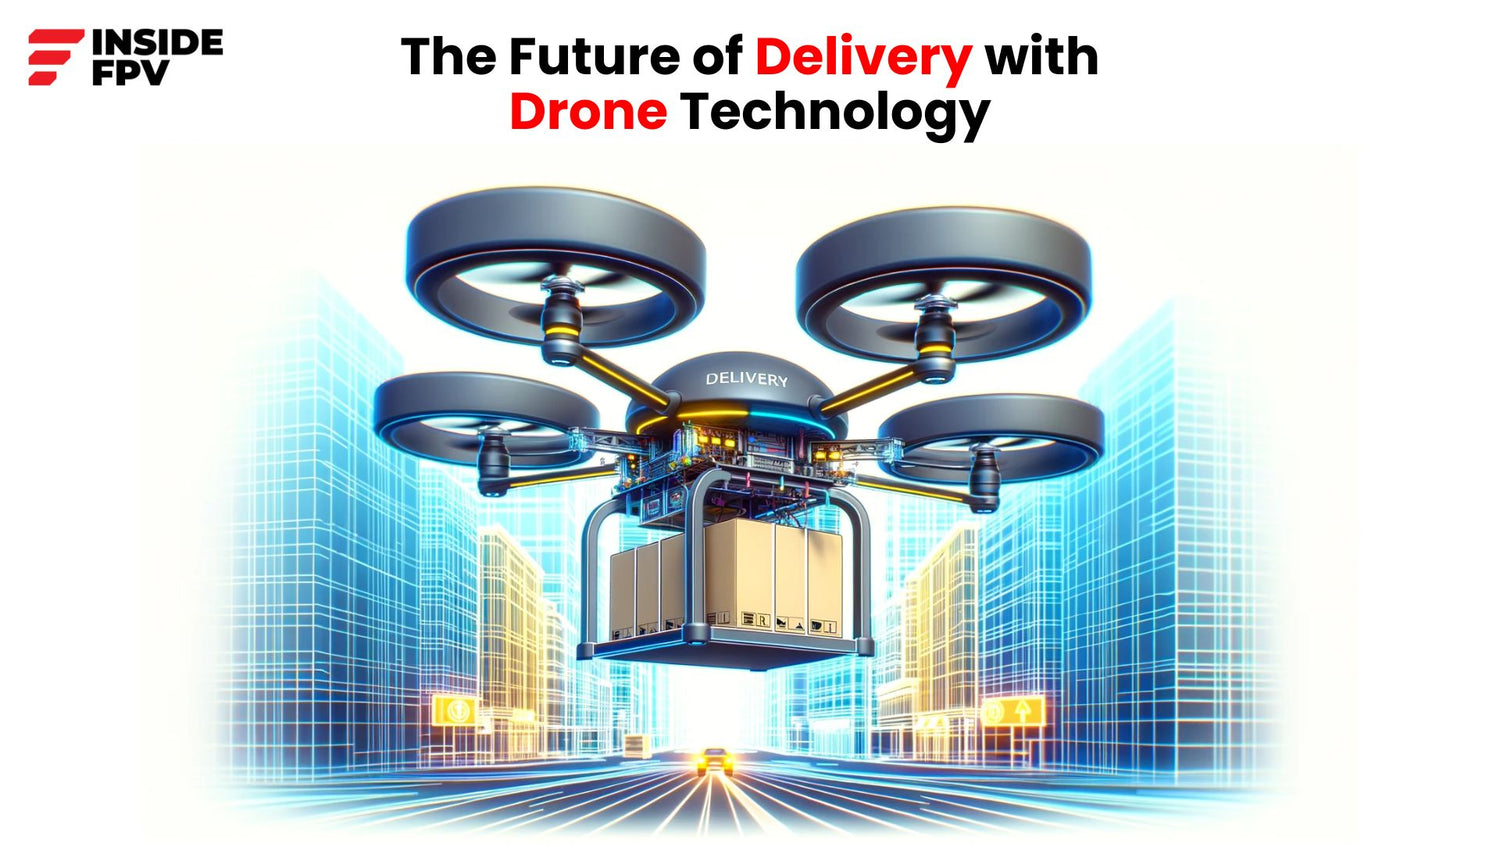 Drones of the Future: The Potential of Delivery Drones